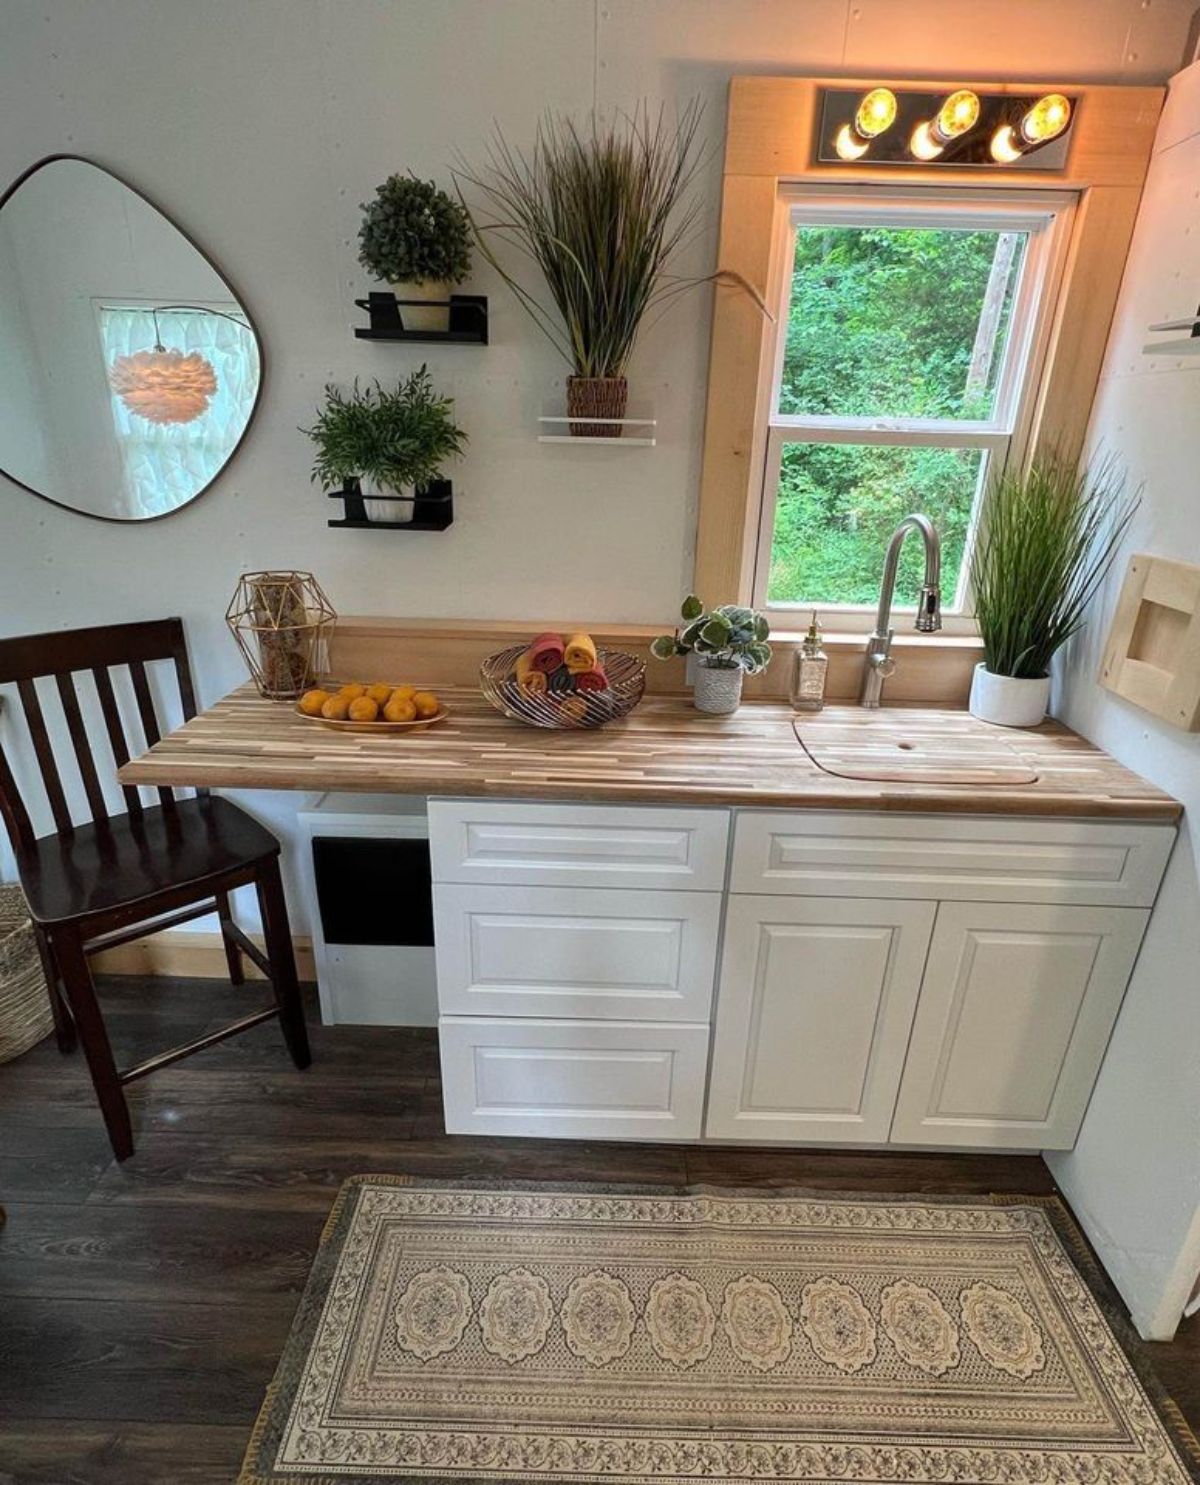 Stunning kitchen area of 16’ Turnkey Ready Tiny House has a lots of storage